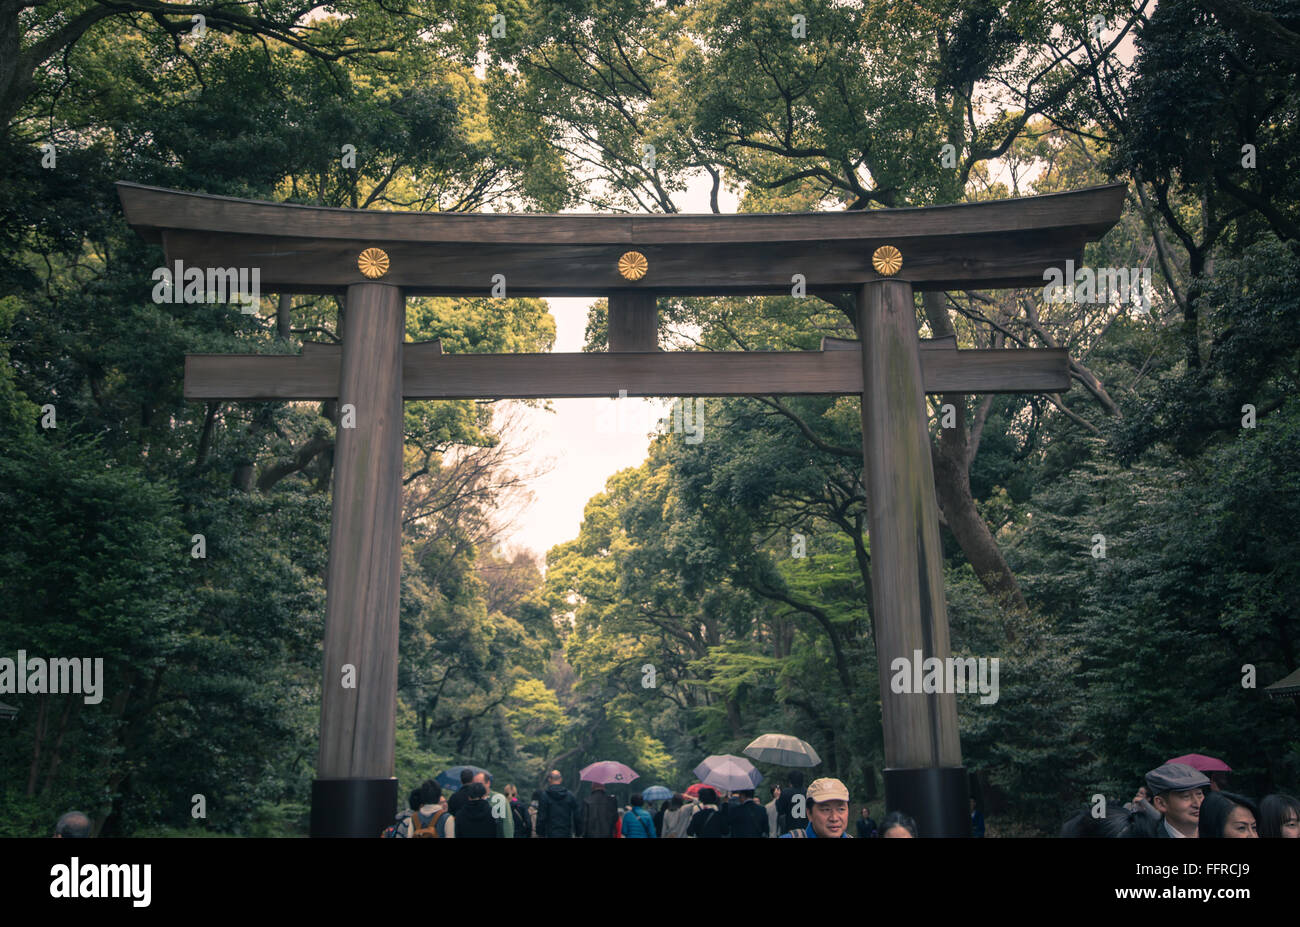 The torii gate at the entrance of the Meiji Shrine in Tokyo, Japan. Stock Photo